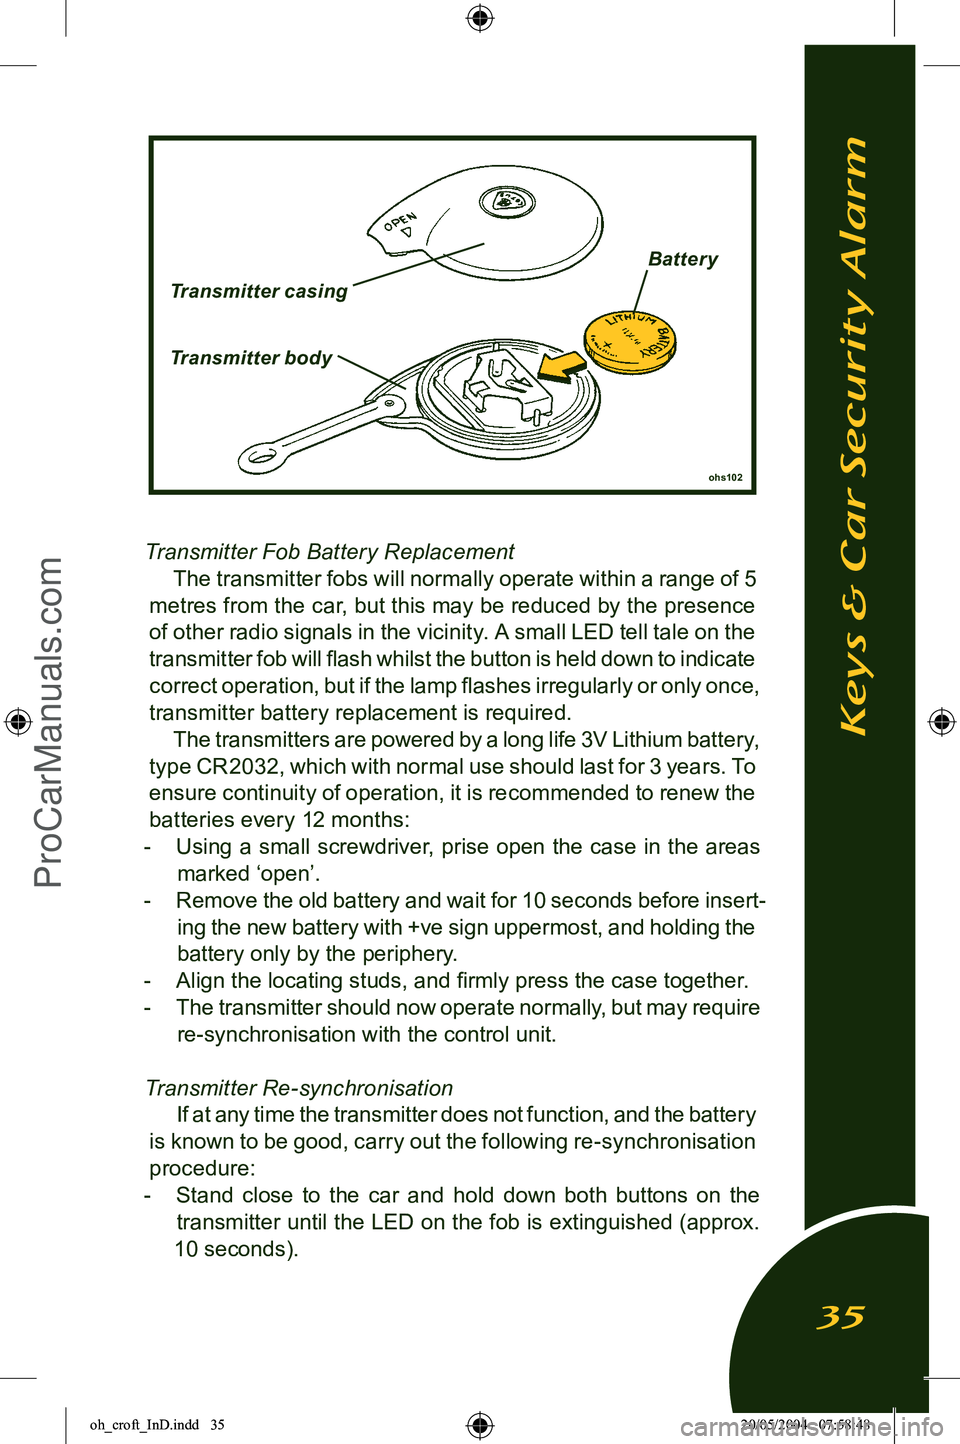 LOTUS ELISE 2005  Owners Manual 
Transmitter Fob Battery ReplacementThe transmitter fobs will normally operate within a range of 5 
metres from the car, but this may be reduced by the presence 
of other radio signals in the vicinity